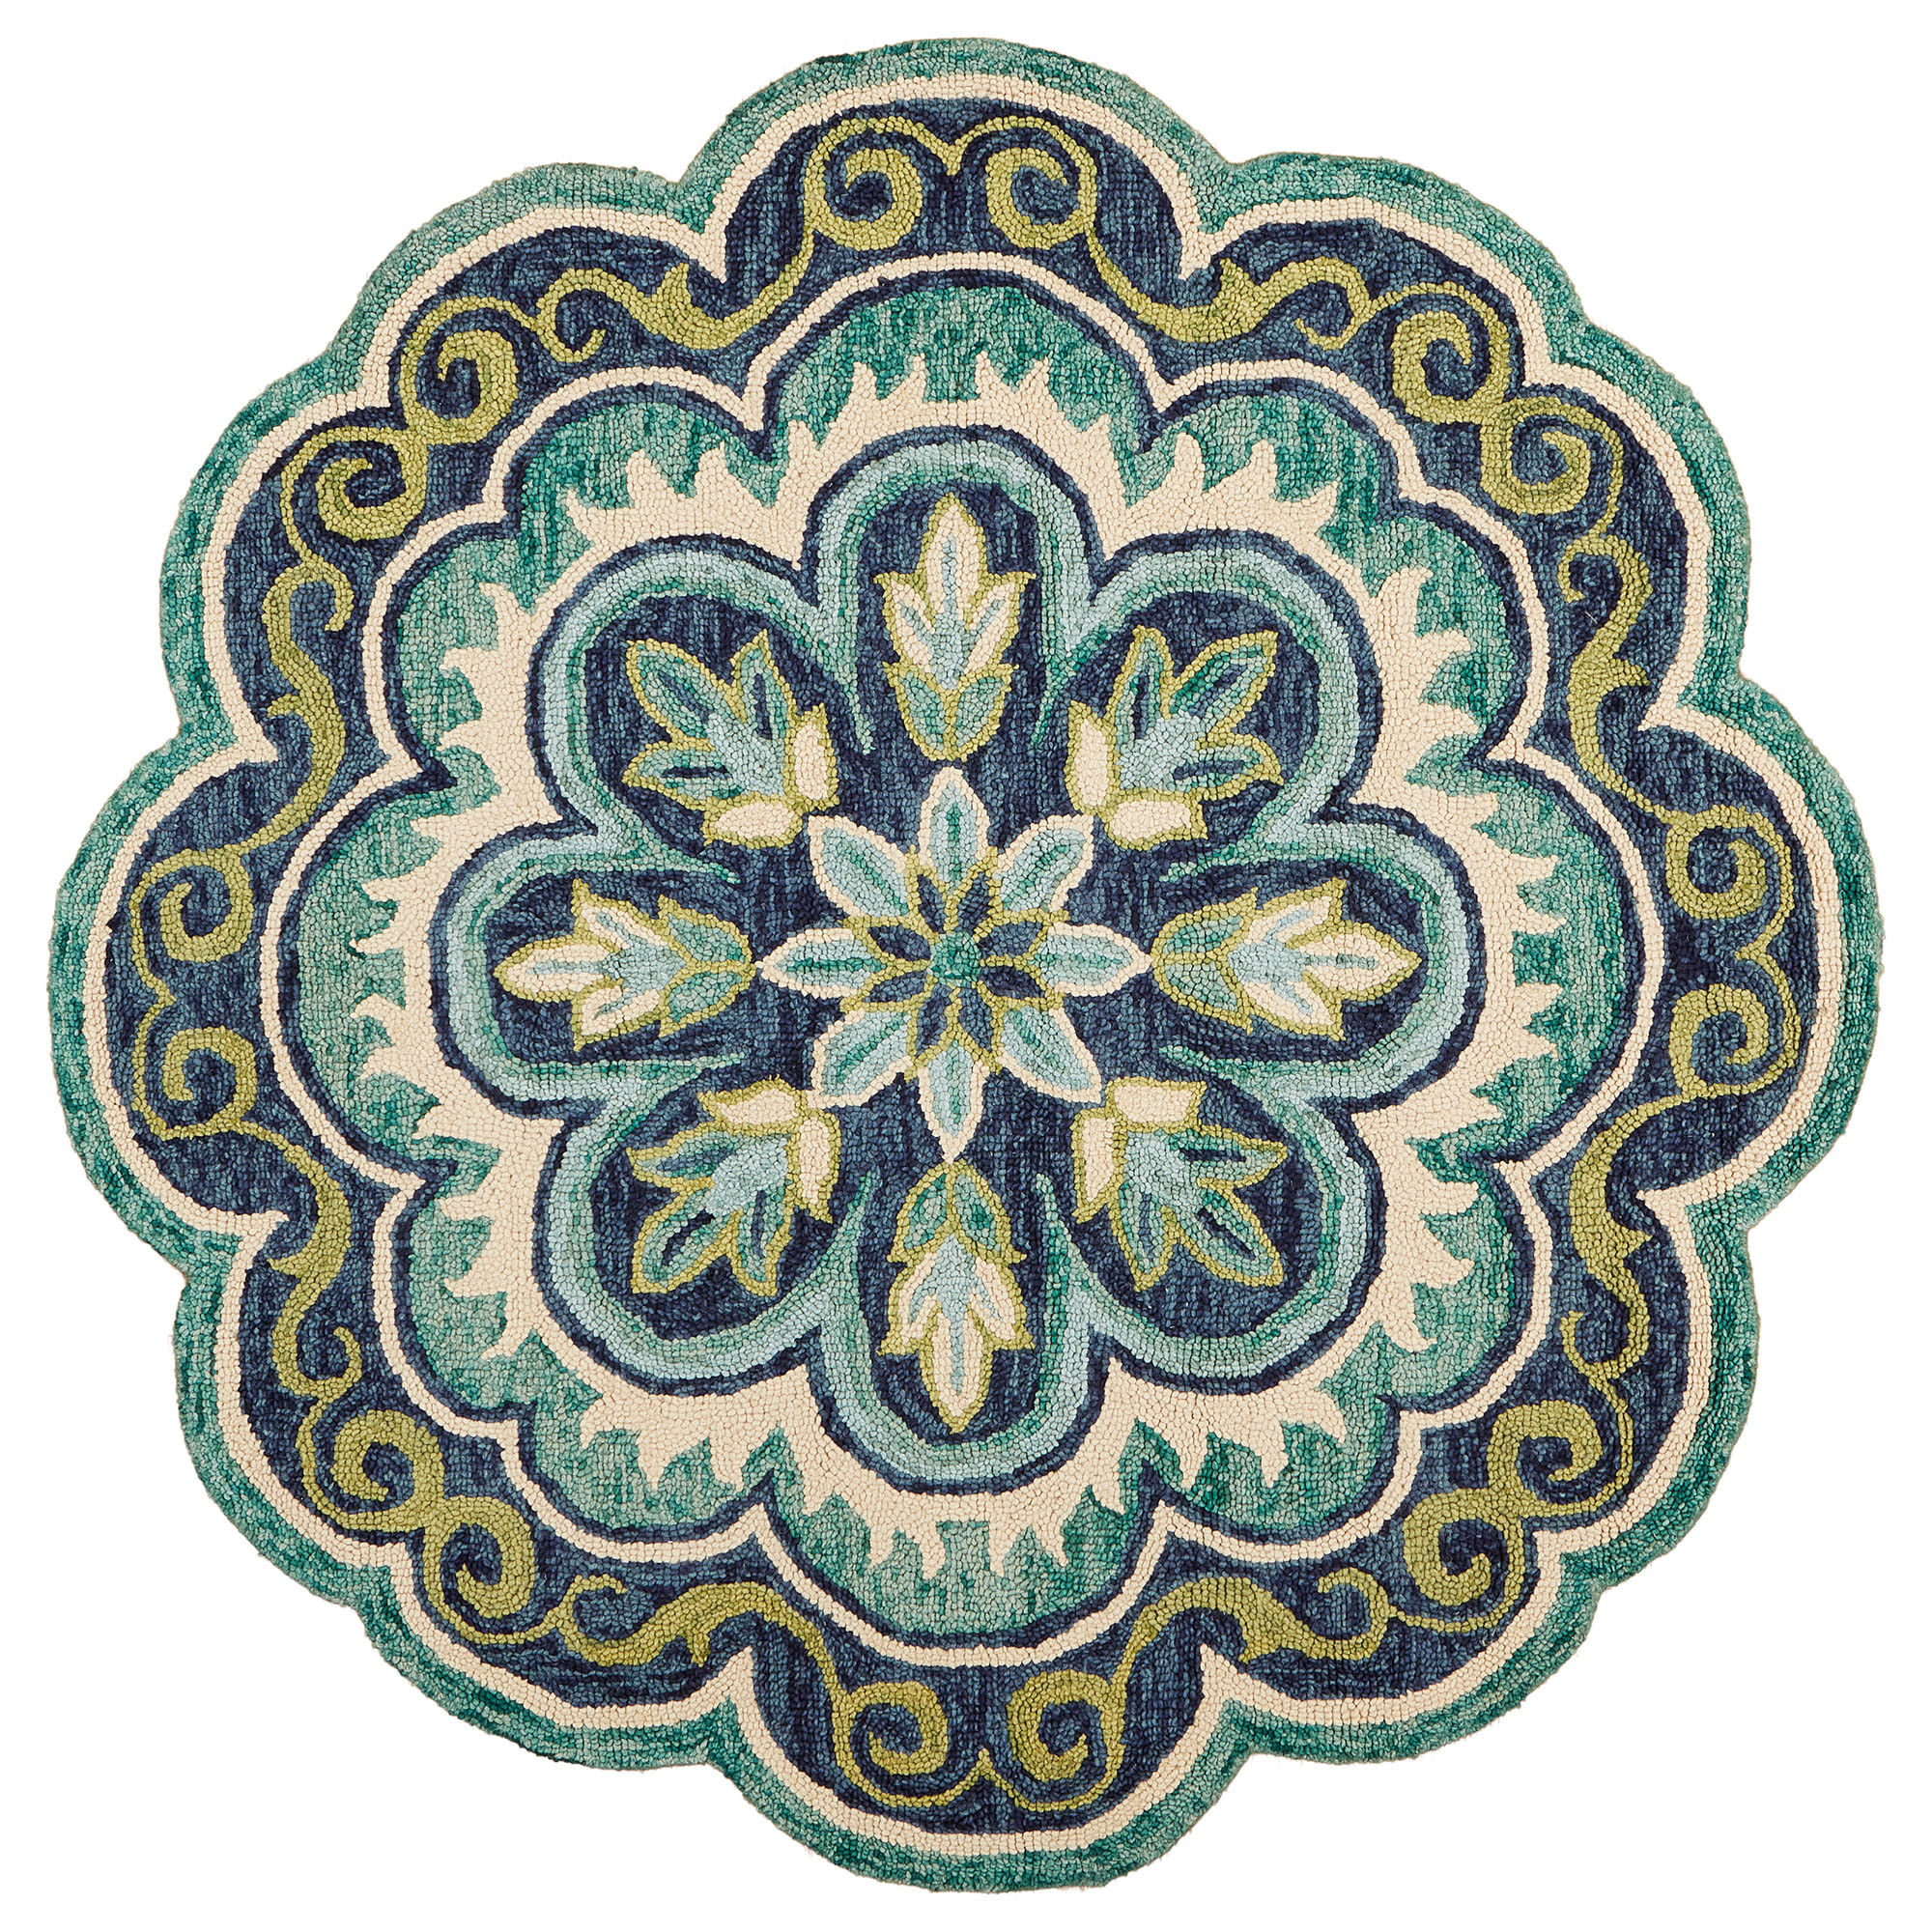 5' X 5' Green Round Wool Floral Hand Tufted Area Rug-533600-1